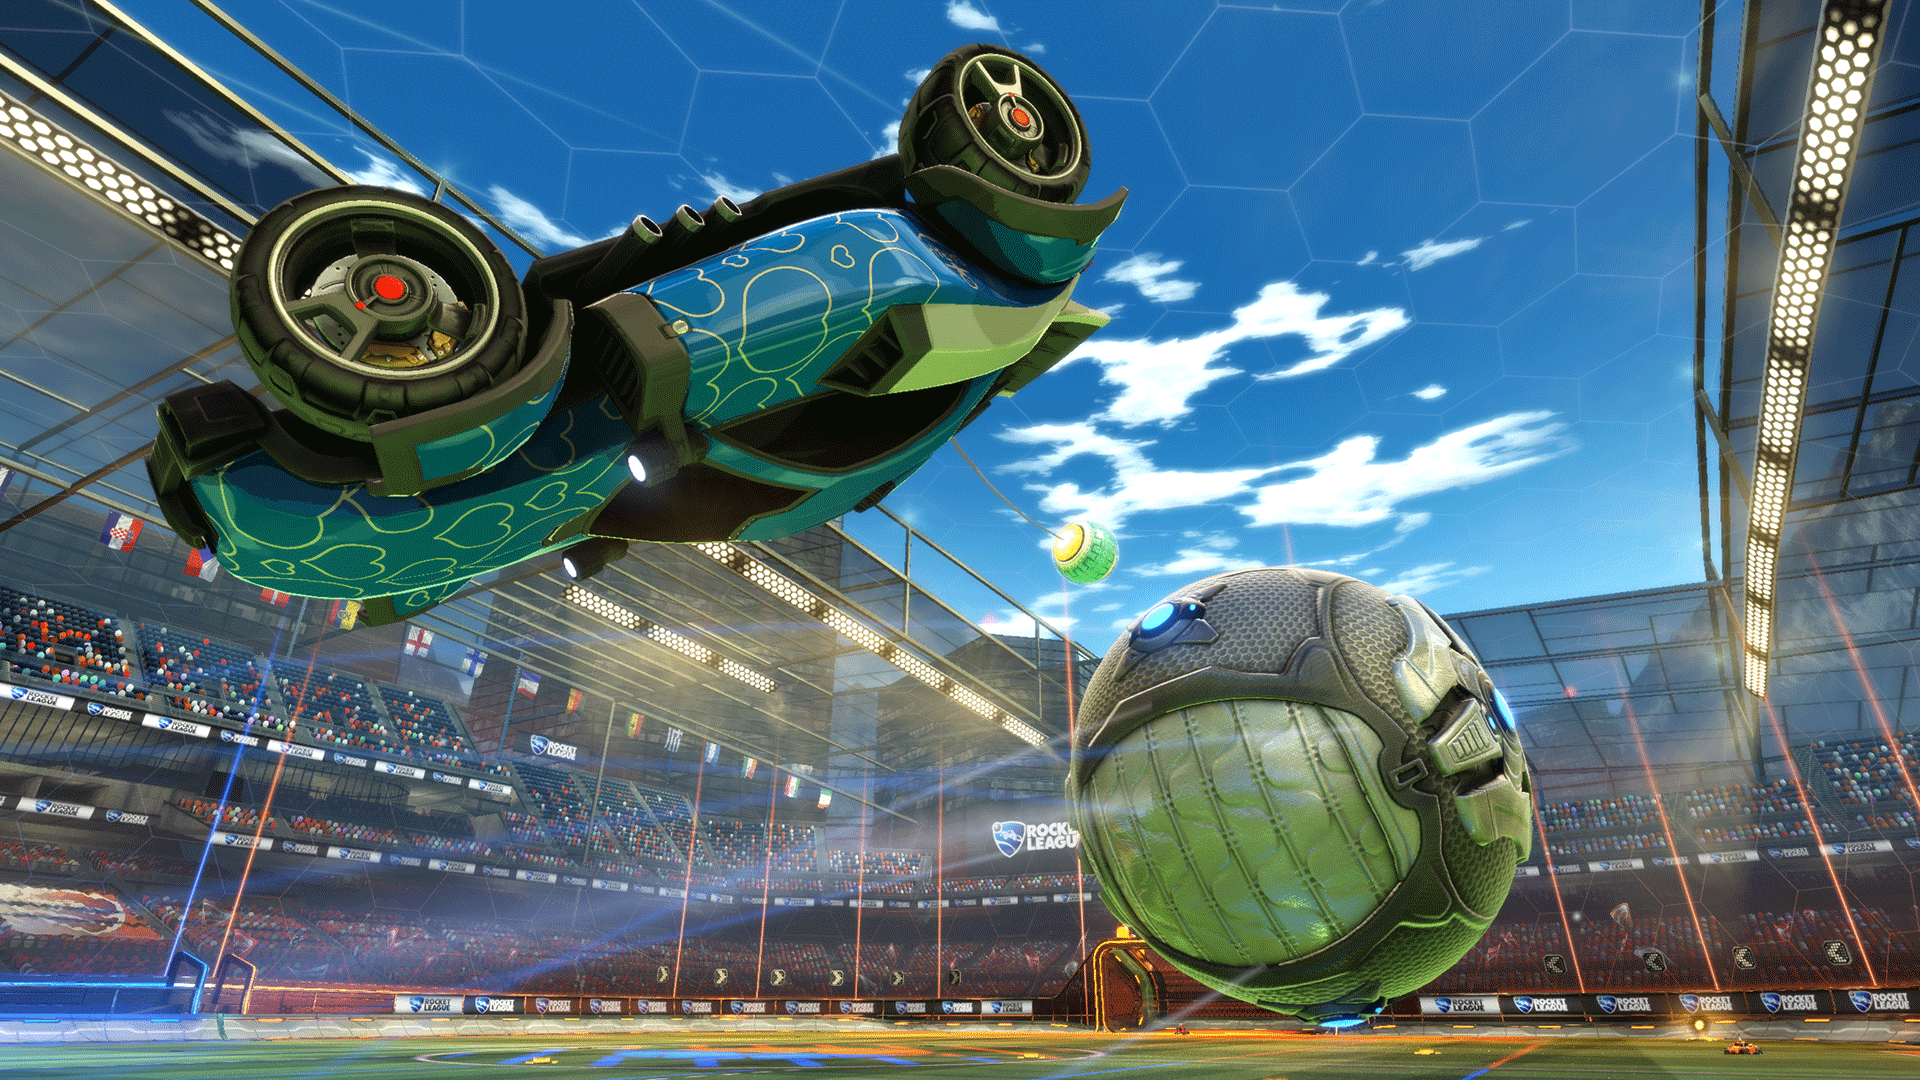 Changes to our Rocket League roster